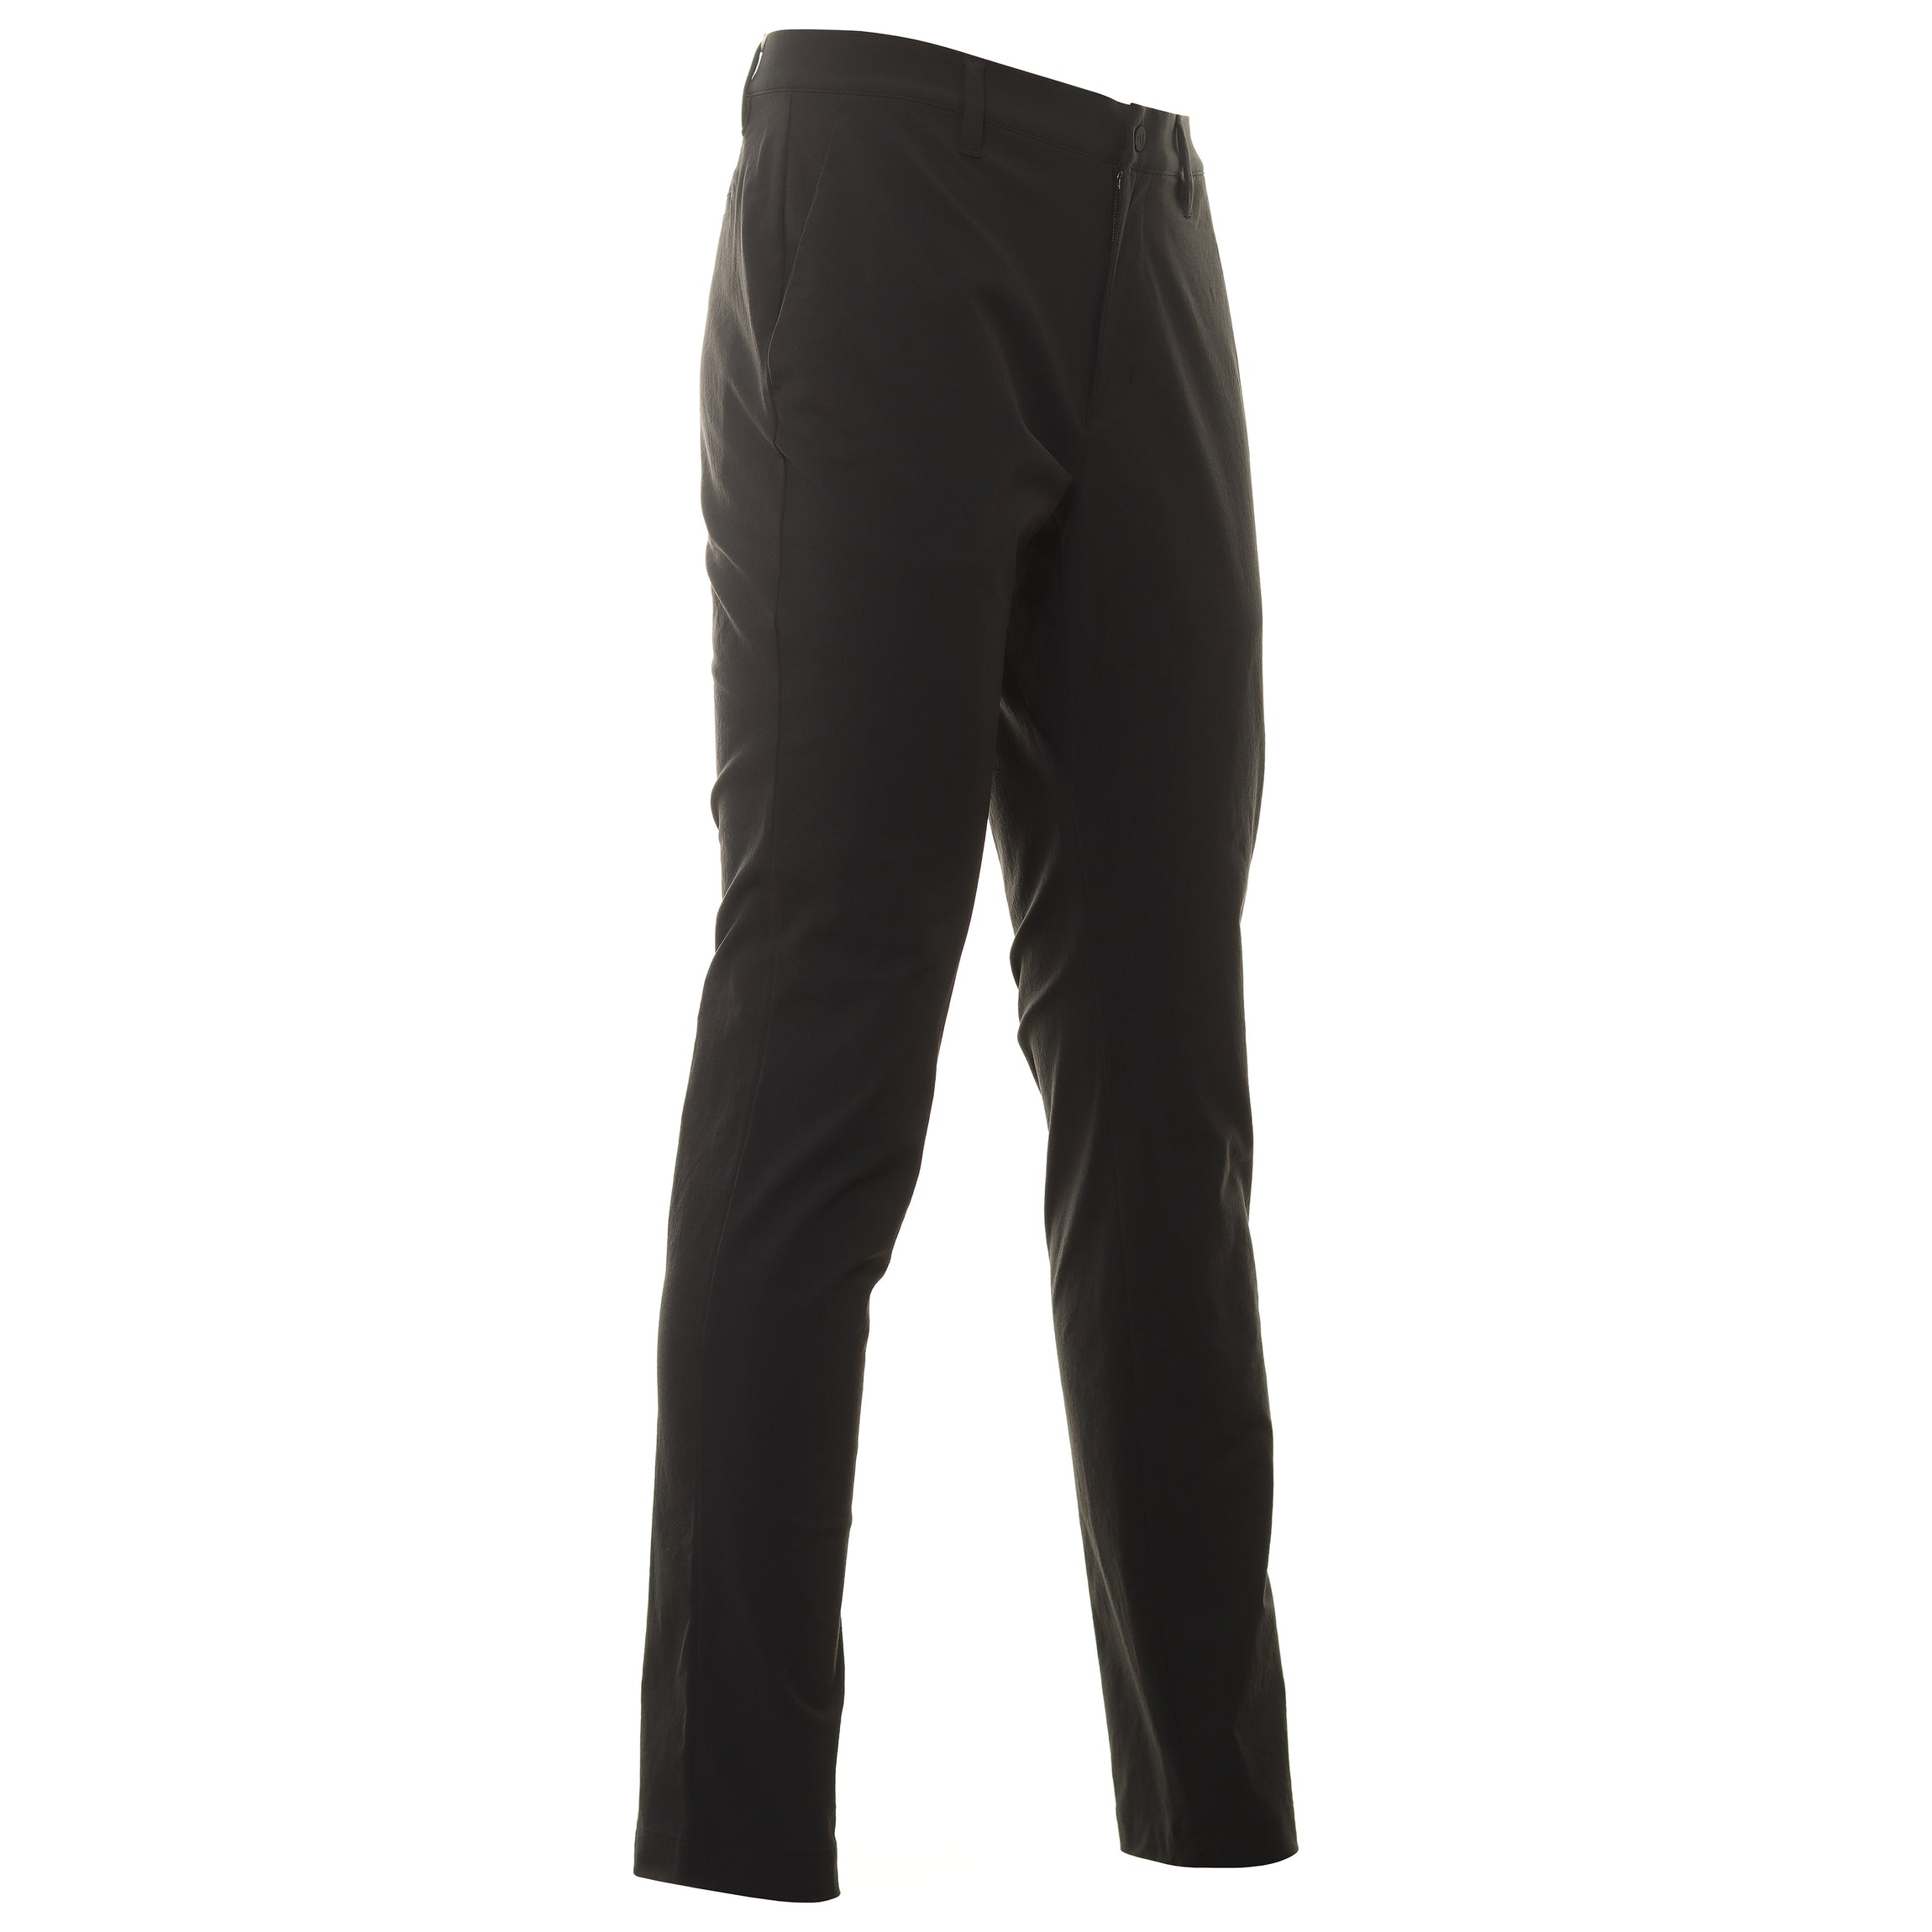 Adidas Golf Trousers | Asiansports.in